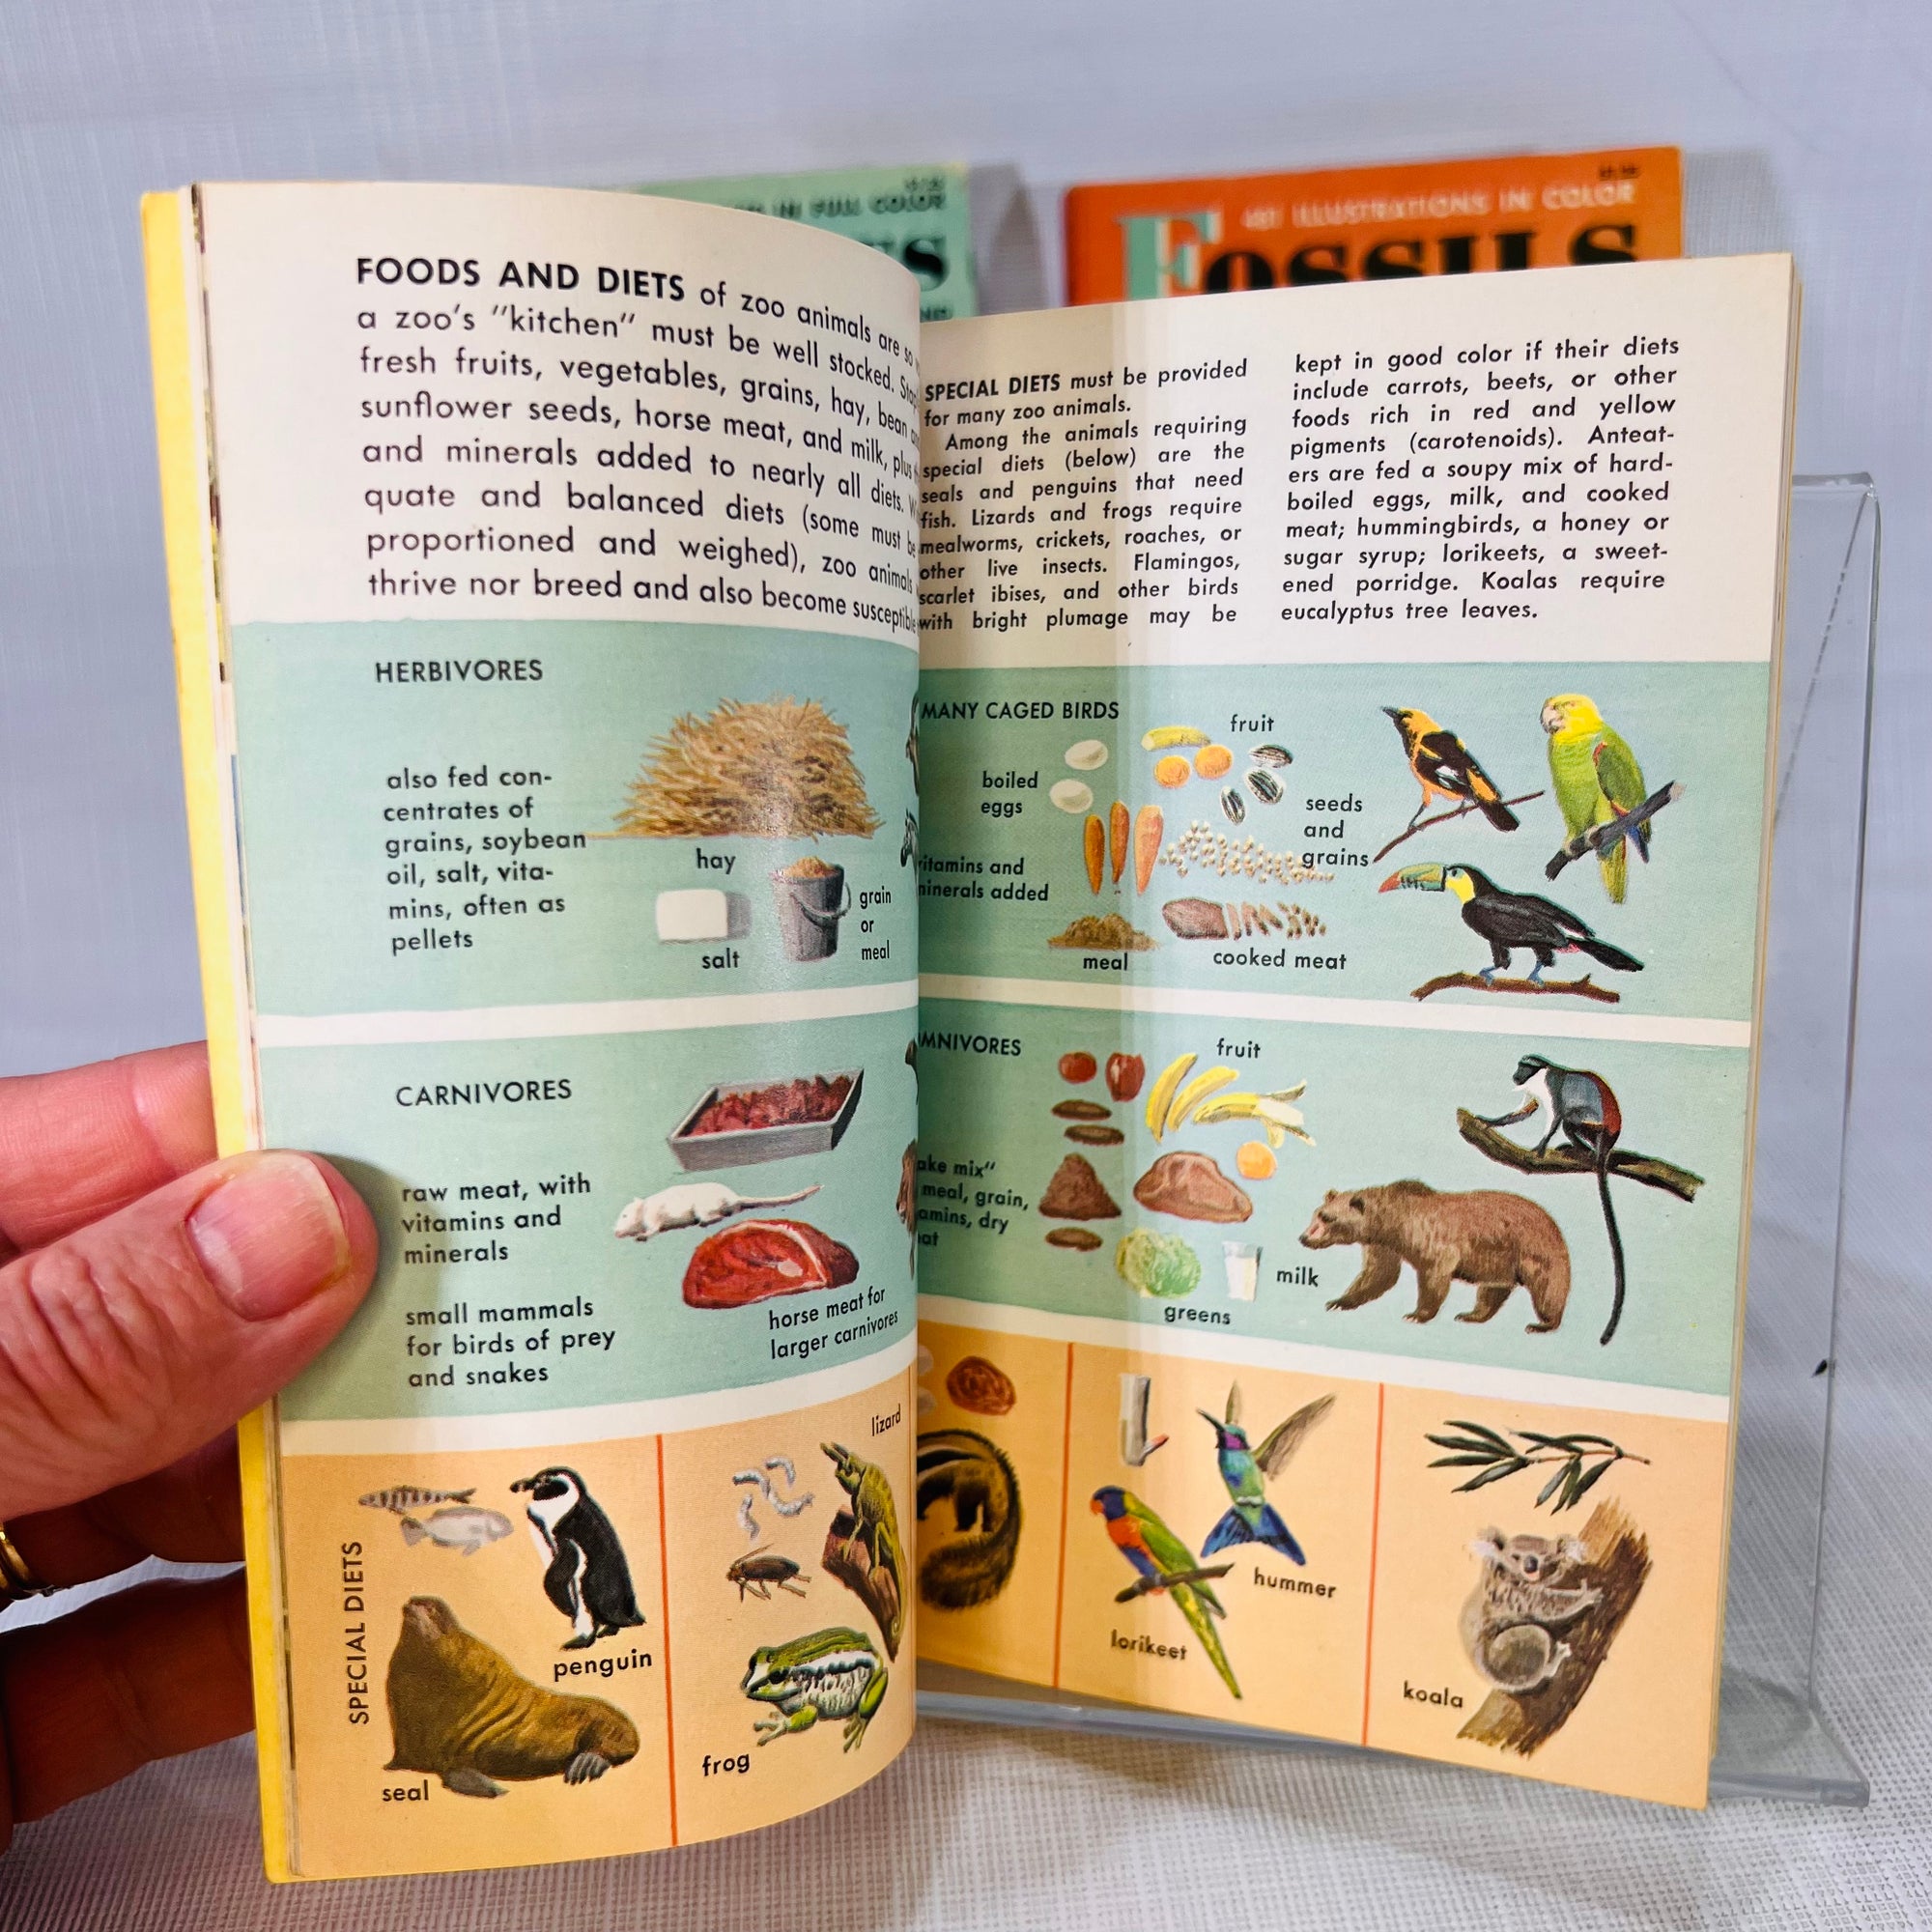 3 Golden Nature Guides Seashores (1955) Fossils (1962) & Zoo Animals (1967) Western Publishing Inc